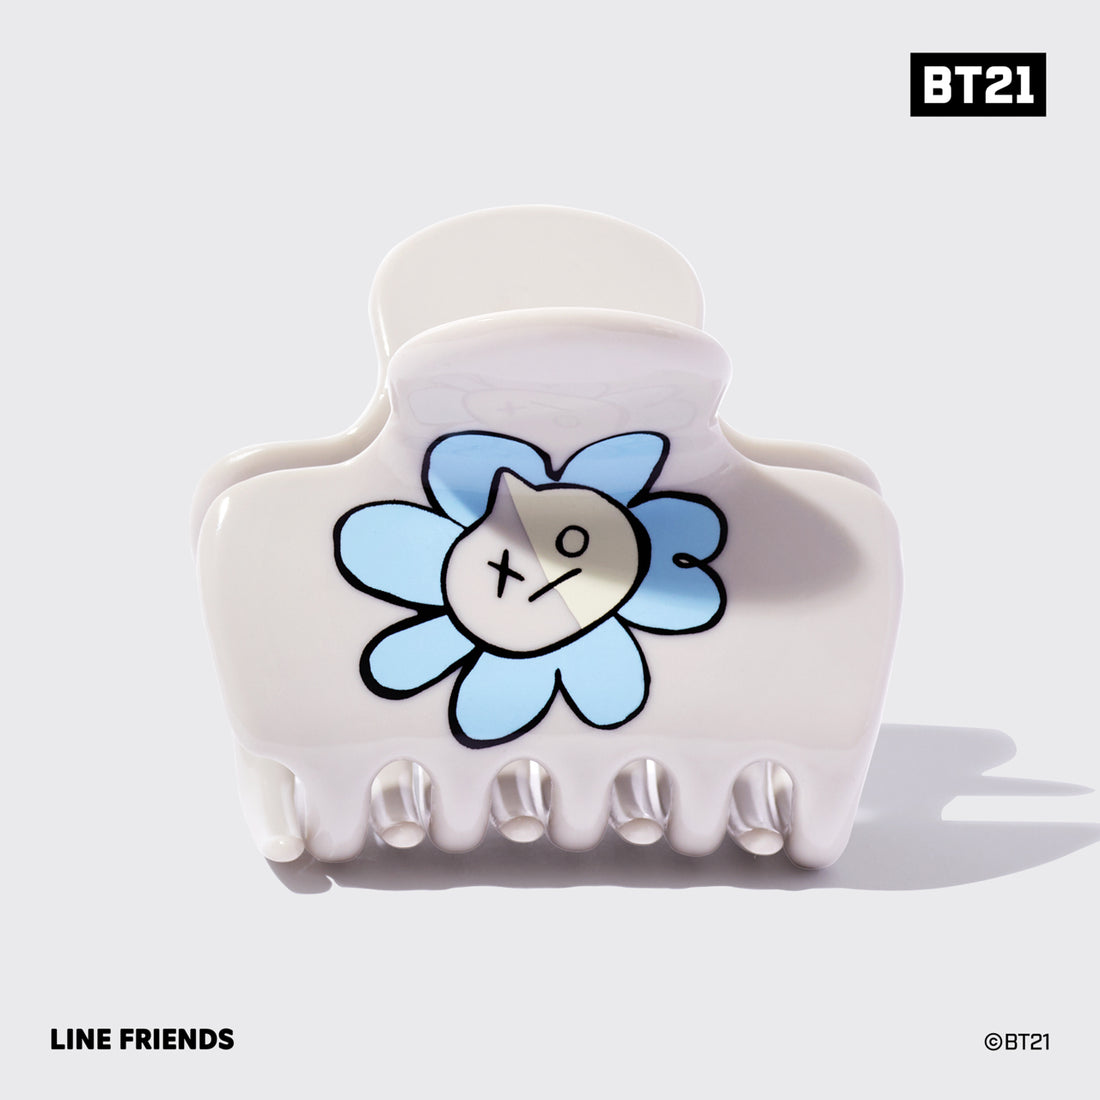 BT21 x Kitsch Recycled Plastic Puffy Claw Clip 1pc - Van